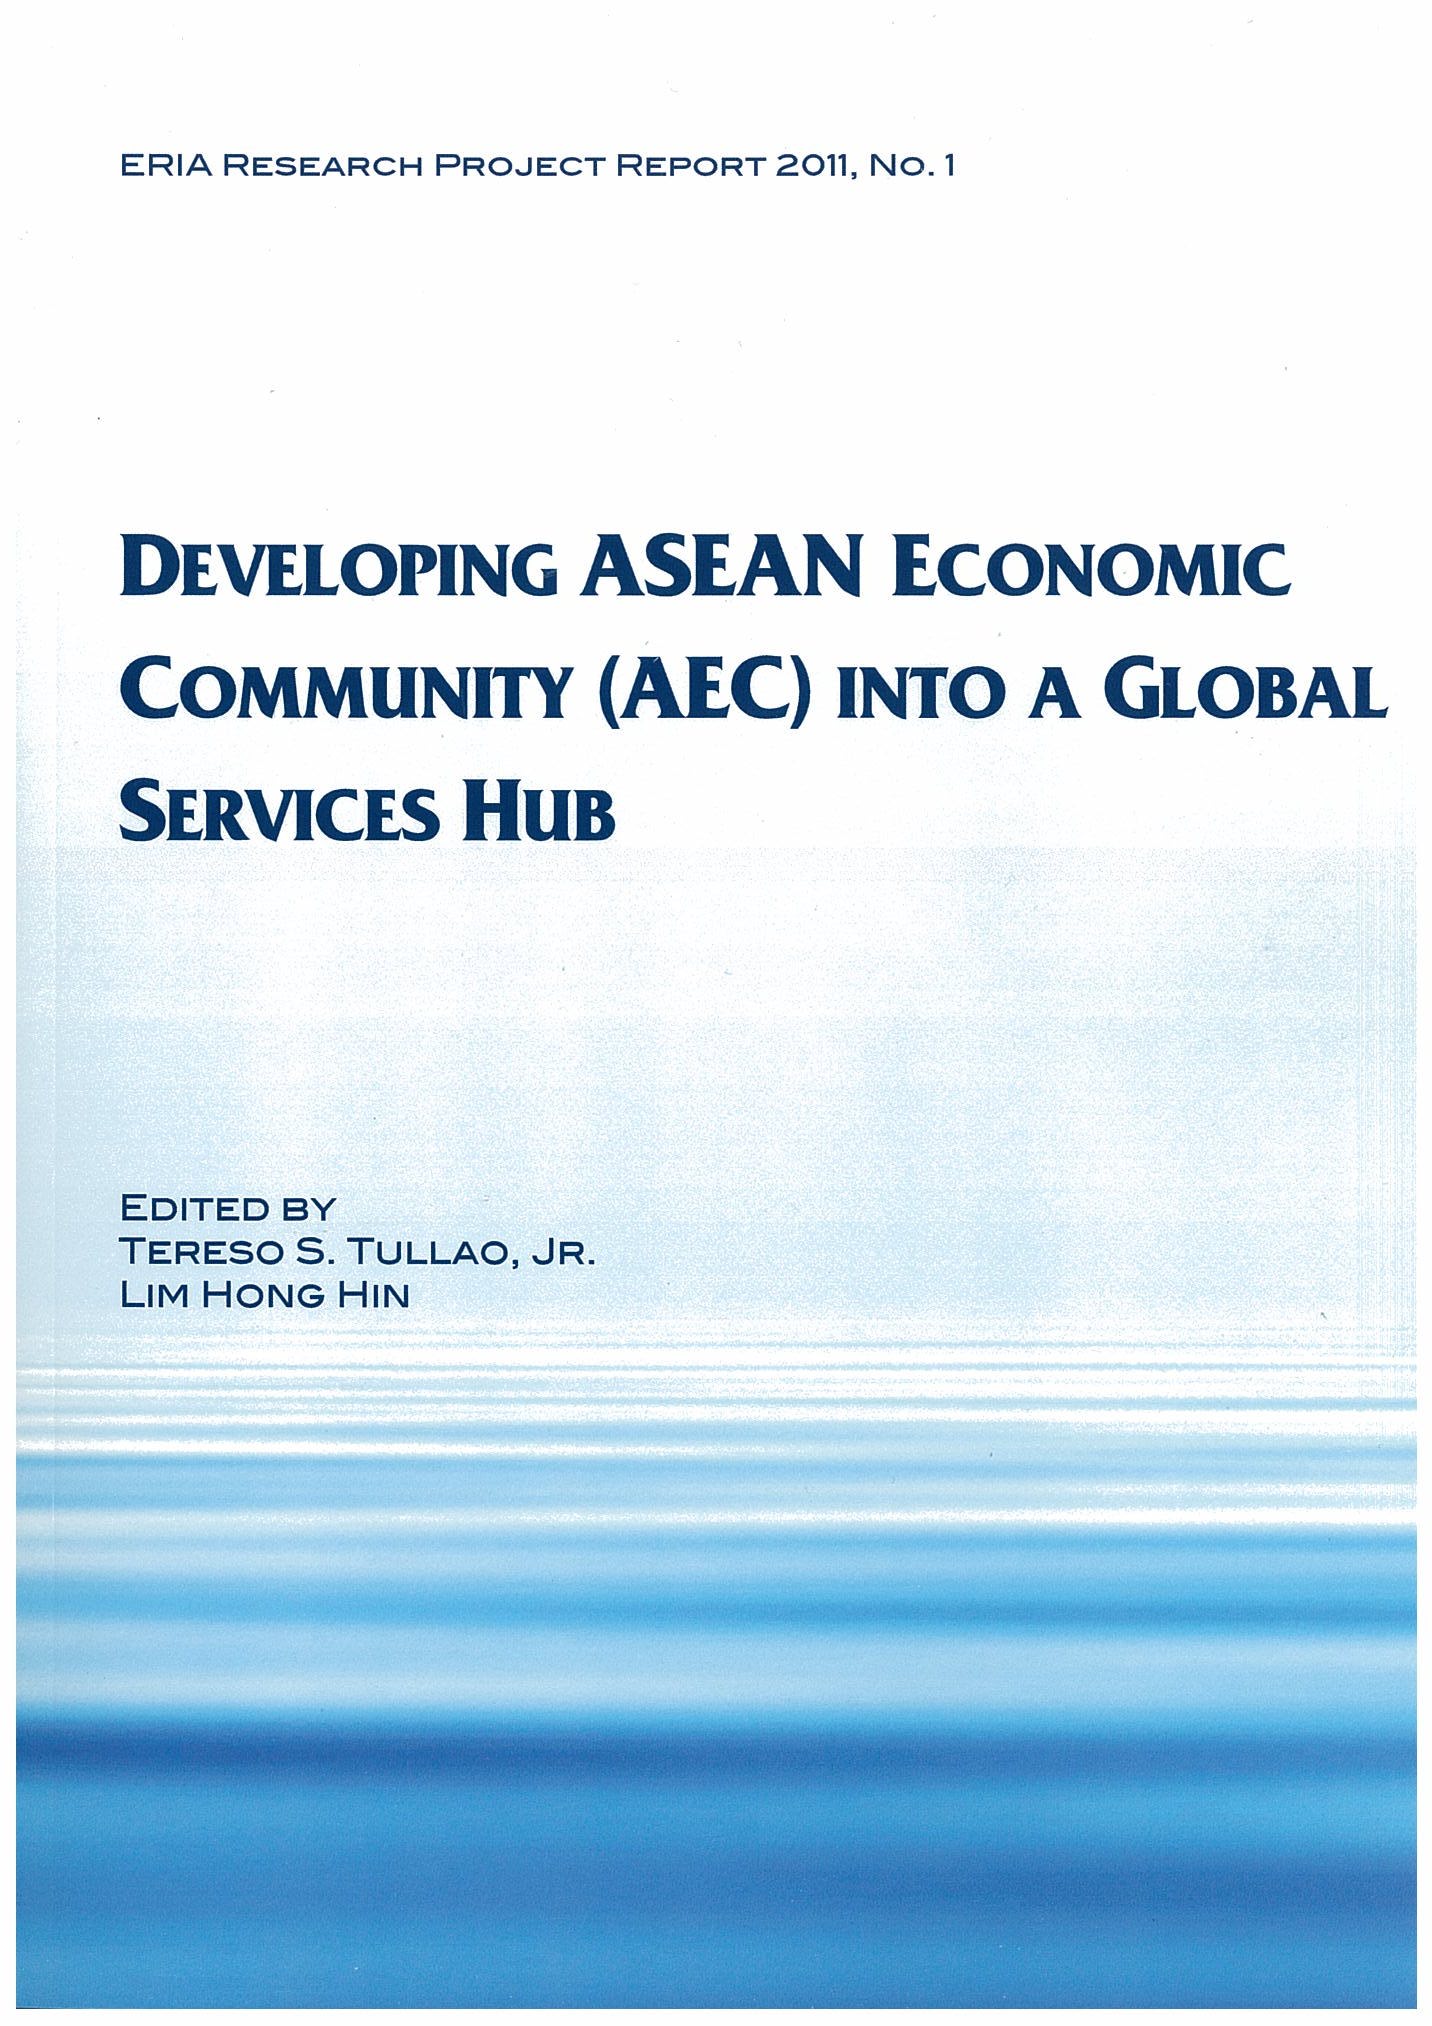 Developing ASEAN Economic Community (AEC) into a Global Service Hub